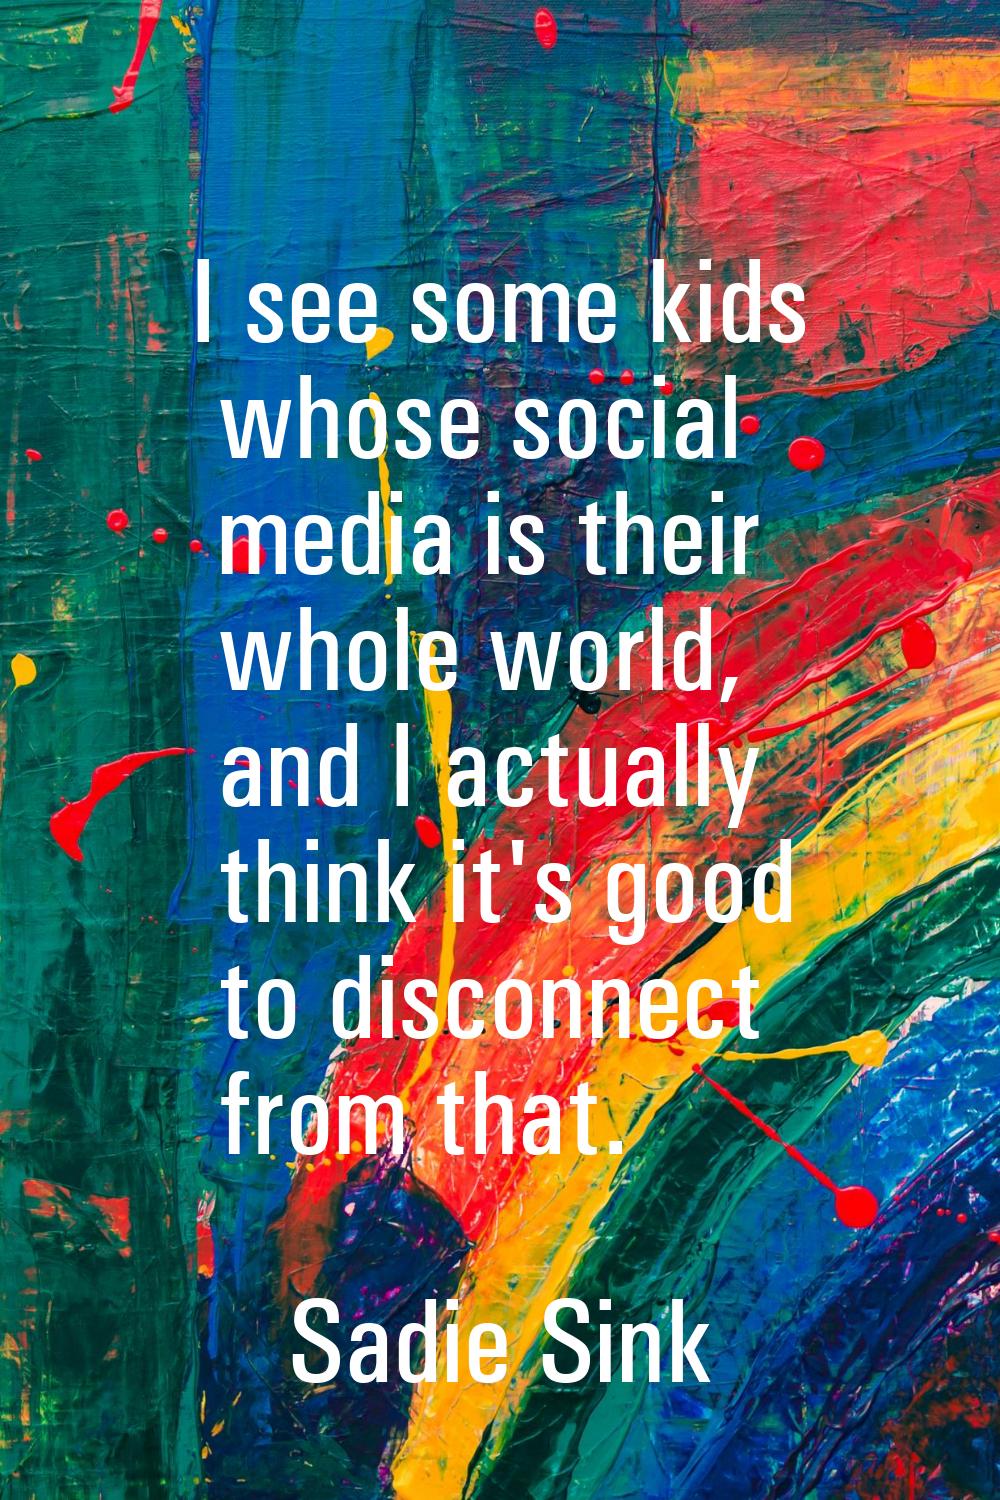 I see some kids whose social media is their whole world, and I actually think it's good to disconne